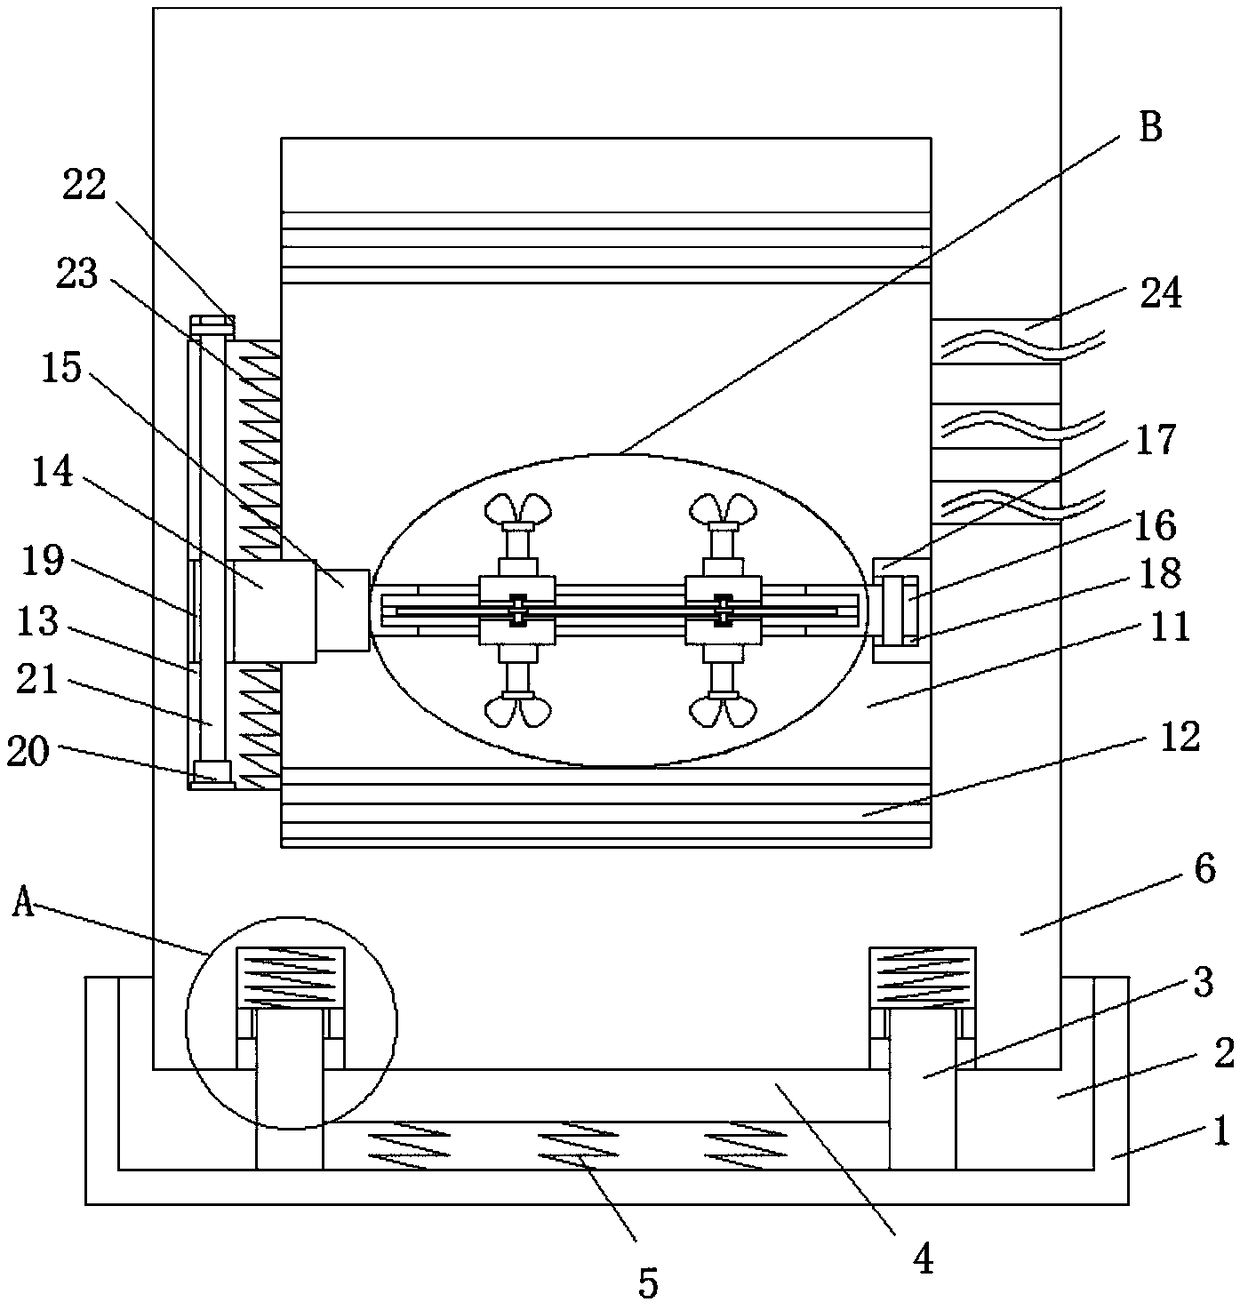 Electrical equipment based on heat dissipation of aluminum substrate